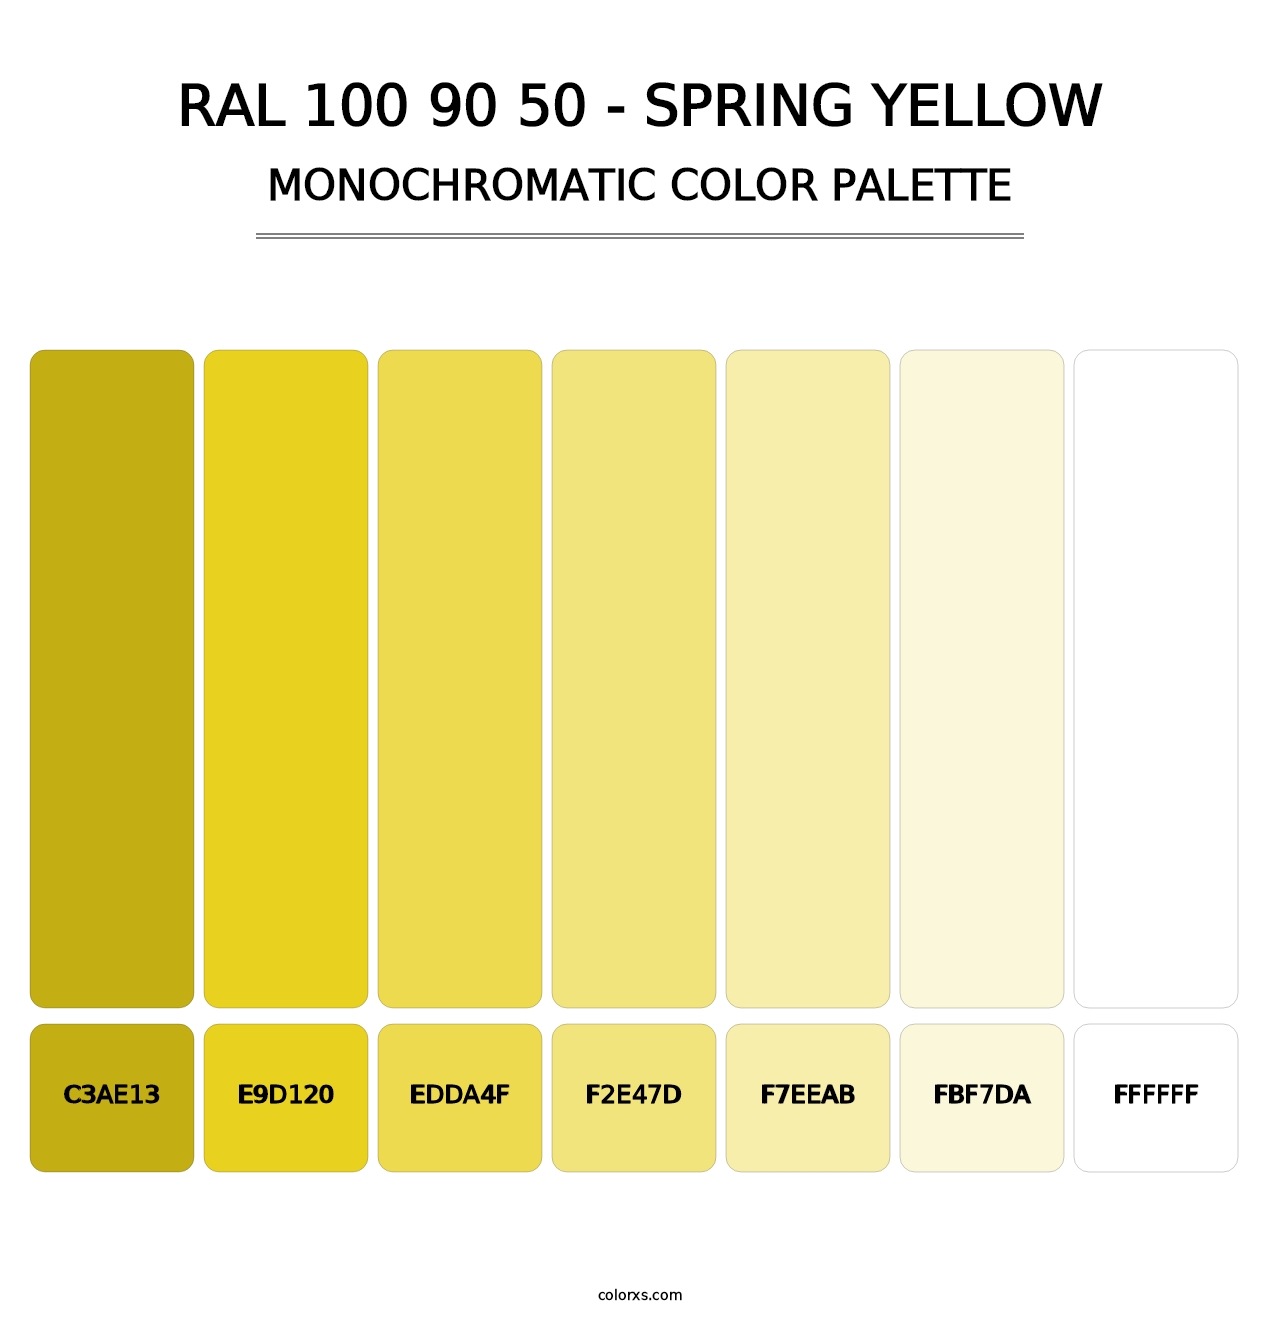 RAL 100 90 50 - Spring Yellow - Monochromatic Color Palette